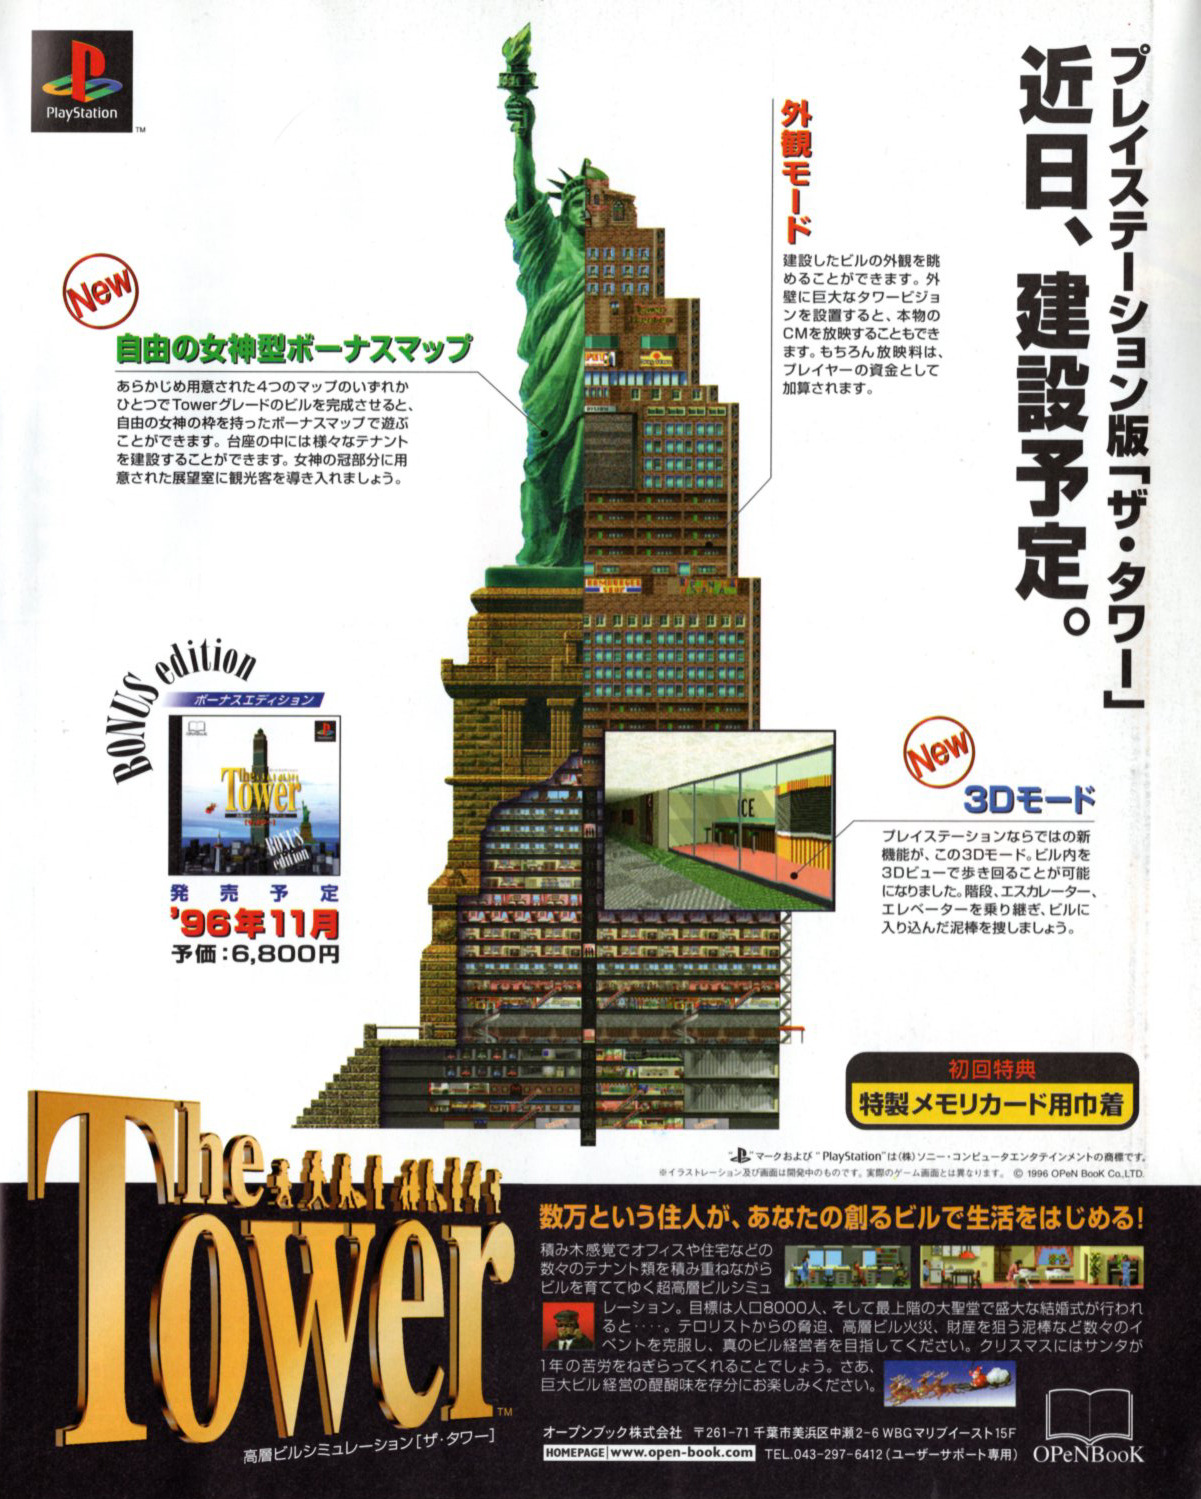 ‘The Tower: Bonus Edition’
[aka: ‘SimTower’][PS1] [JAPAN] [MAGAZINE] [1996]
• PlayStation Magazine (JPN), 09/27/1996 (#18)
• via personal collection
• SimTower comes to the PlayStation, with updated features and 3D graphics!